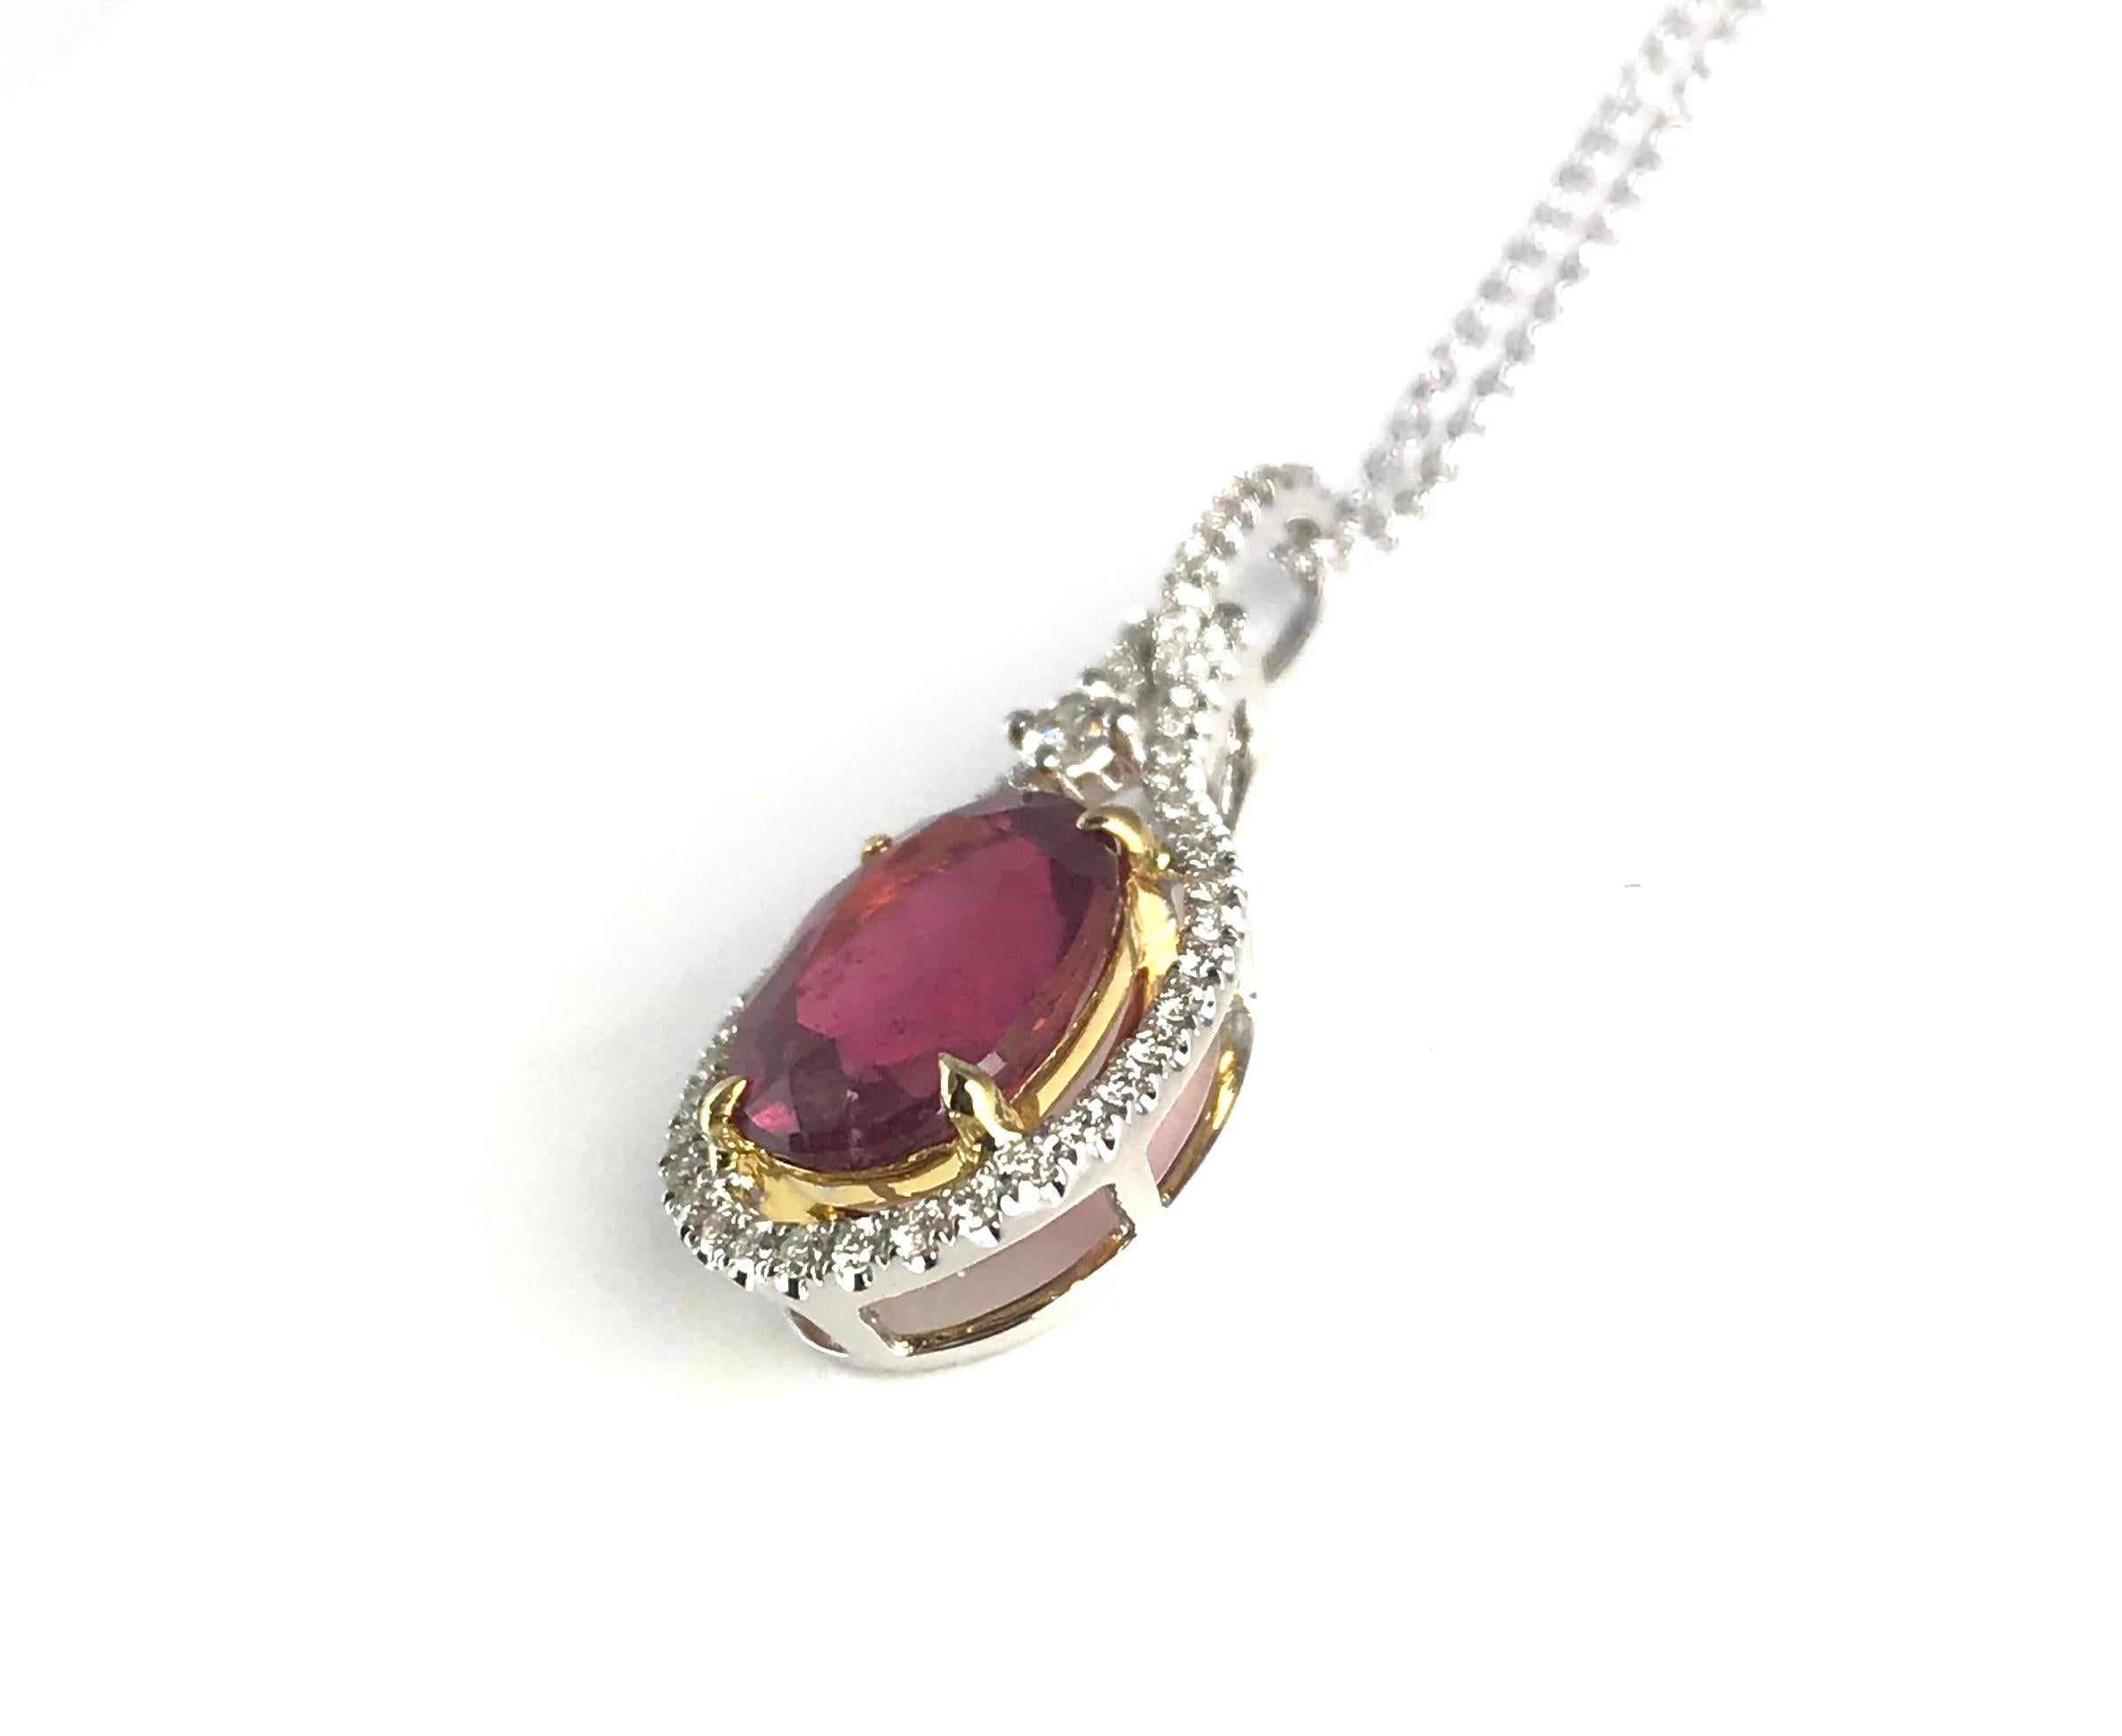 Within this exquisite pendant, you'll find a 2.60 carat oval-cut raspberry tourmaline gracefully encircled by round white diamonds. The tourmaline is delicately nestled in an 18k yellow gold setting, while the remainder of the piece is elegantly